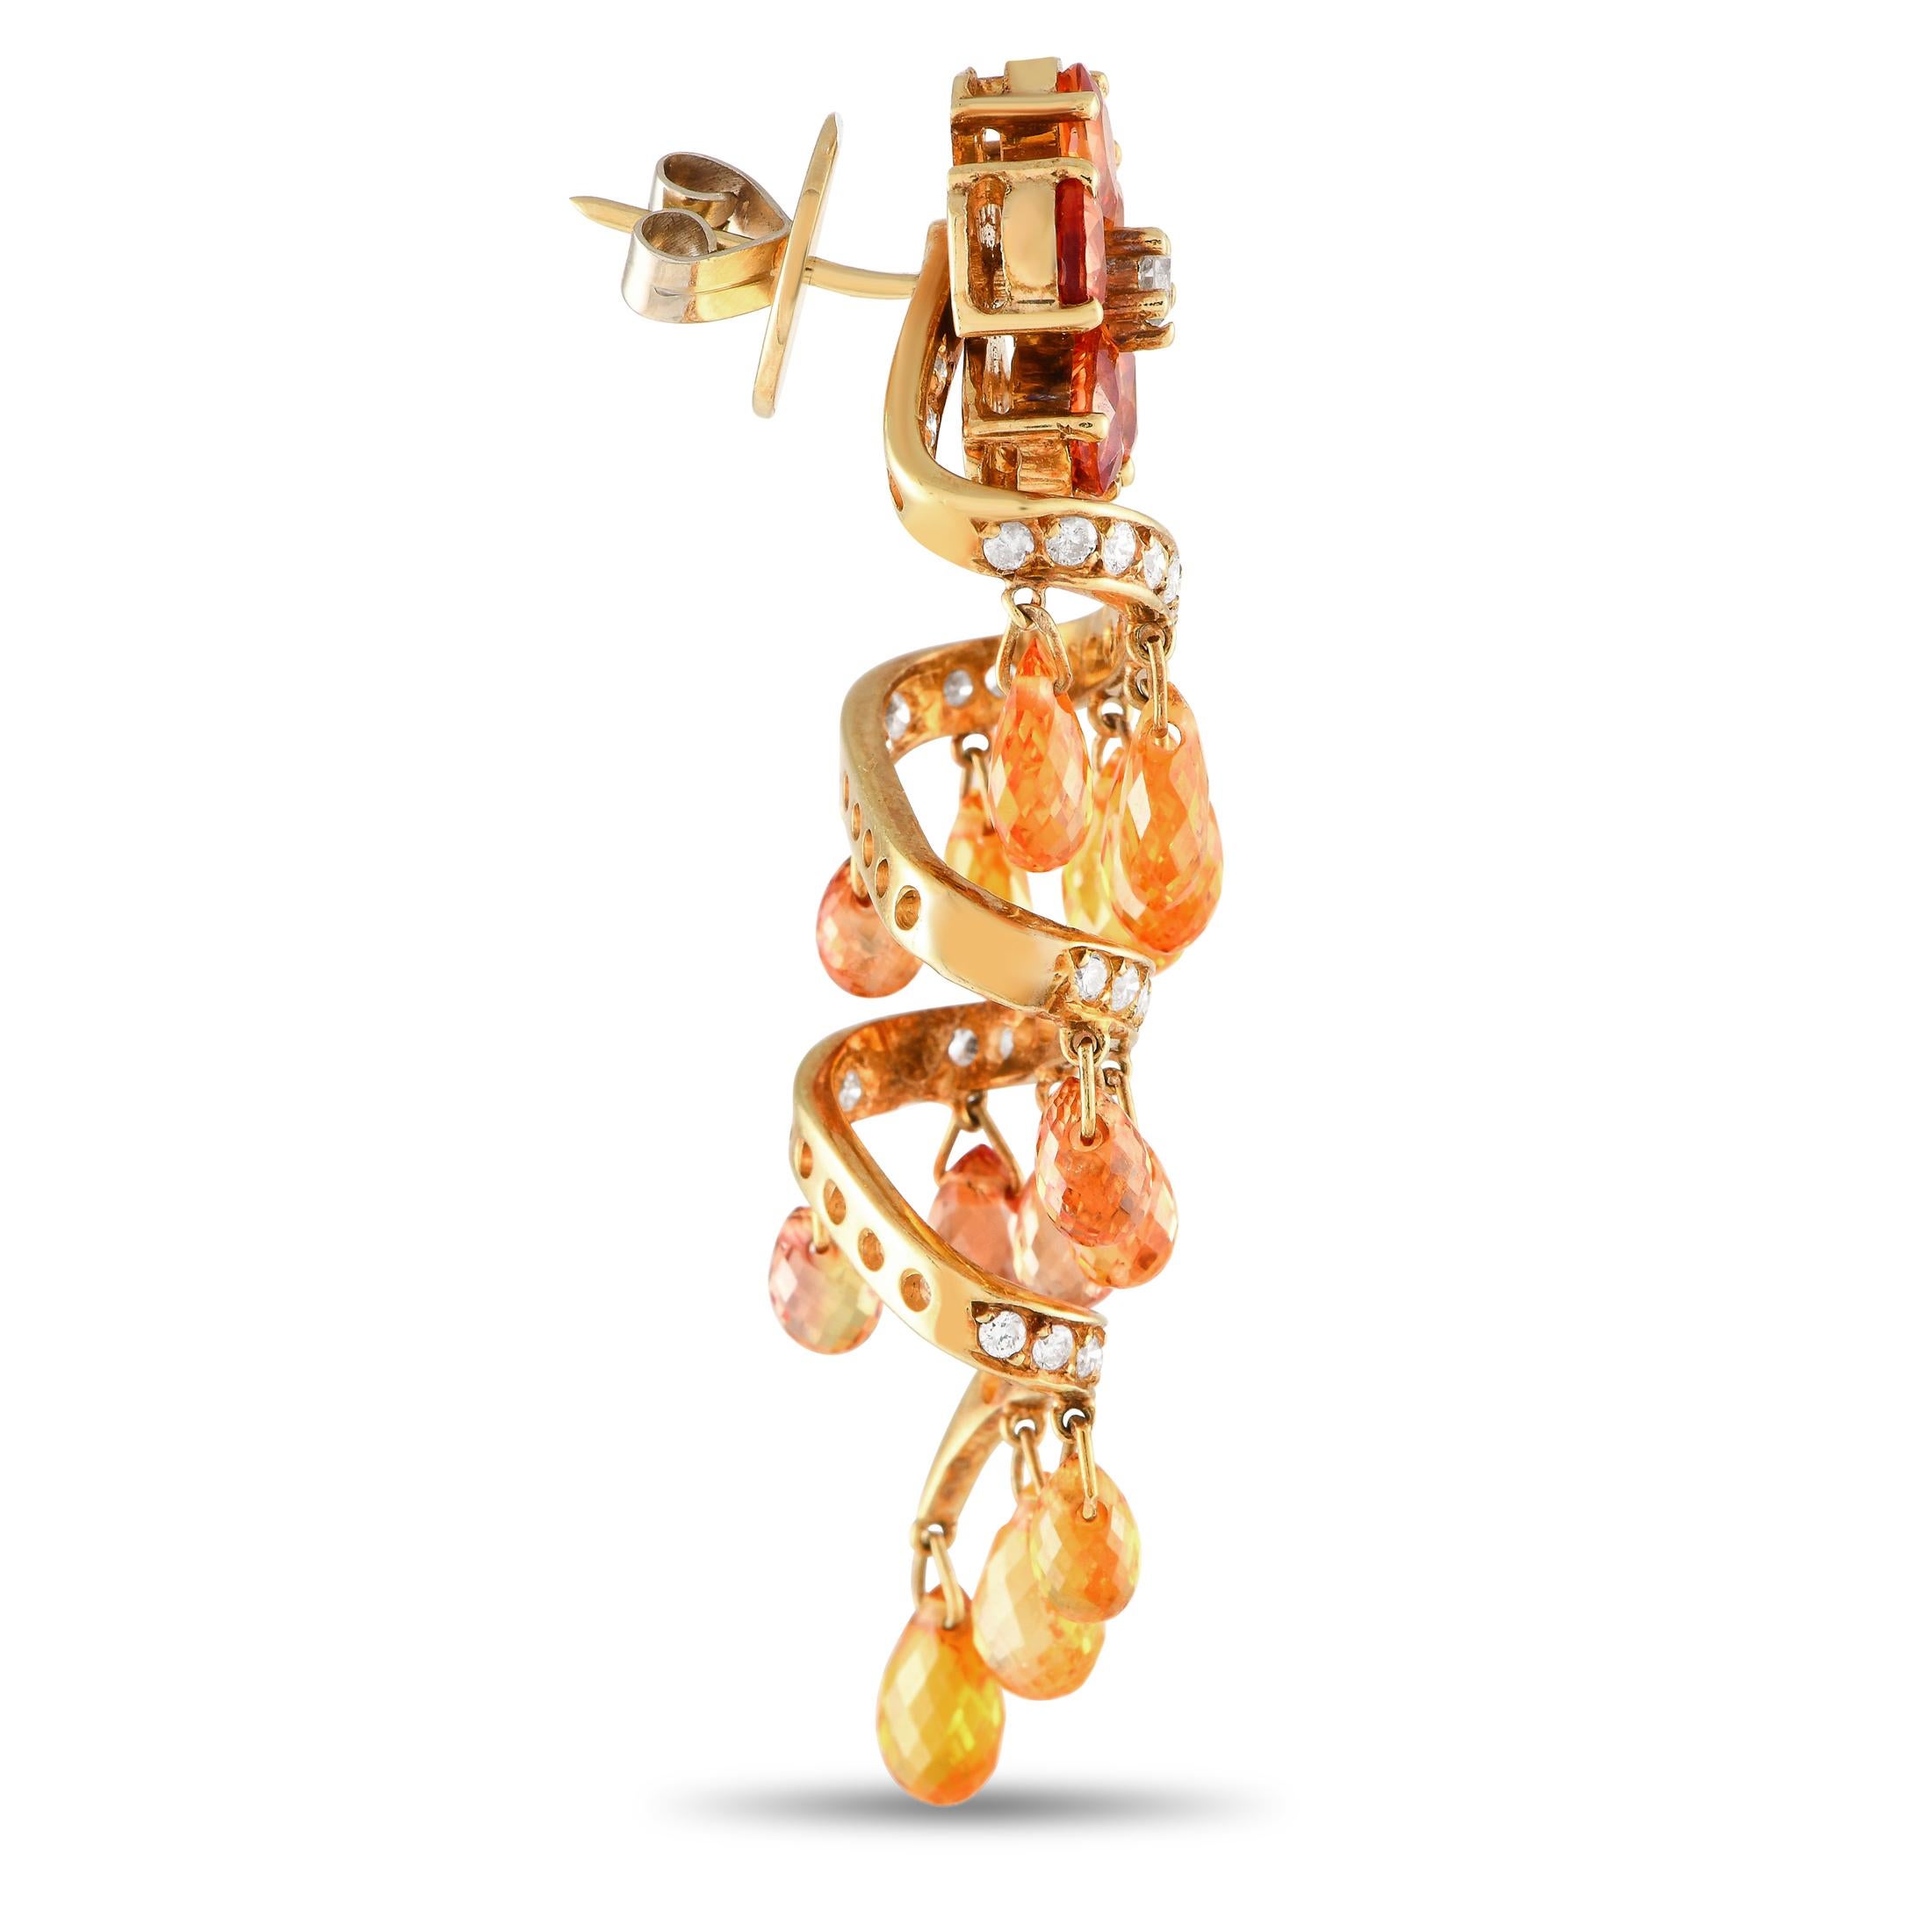 Let this pair of 18K yellow gold chandelier earrings add an extra classy touch to your stylish evening dress. Each earring is designed with a floral post composed of a diamond center and five citrine petals. Connected to it is a diamond-encrusted